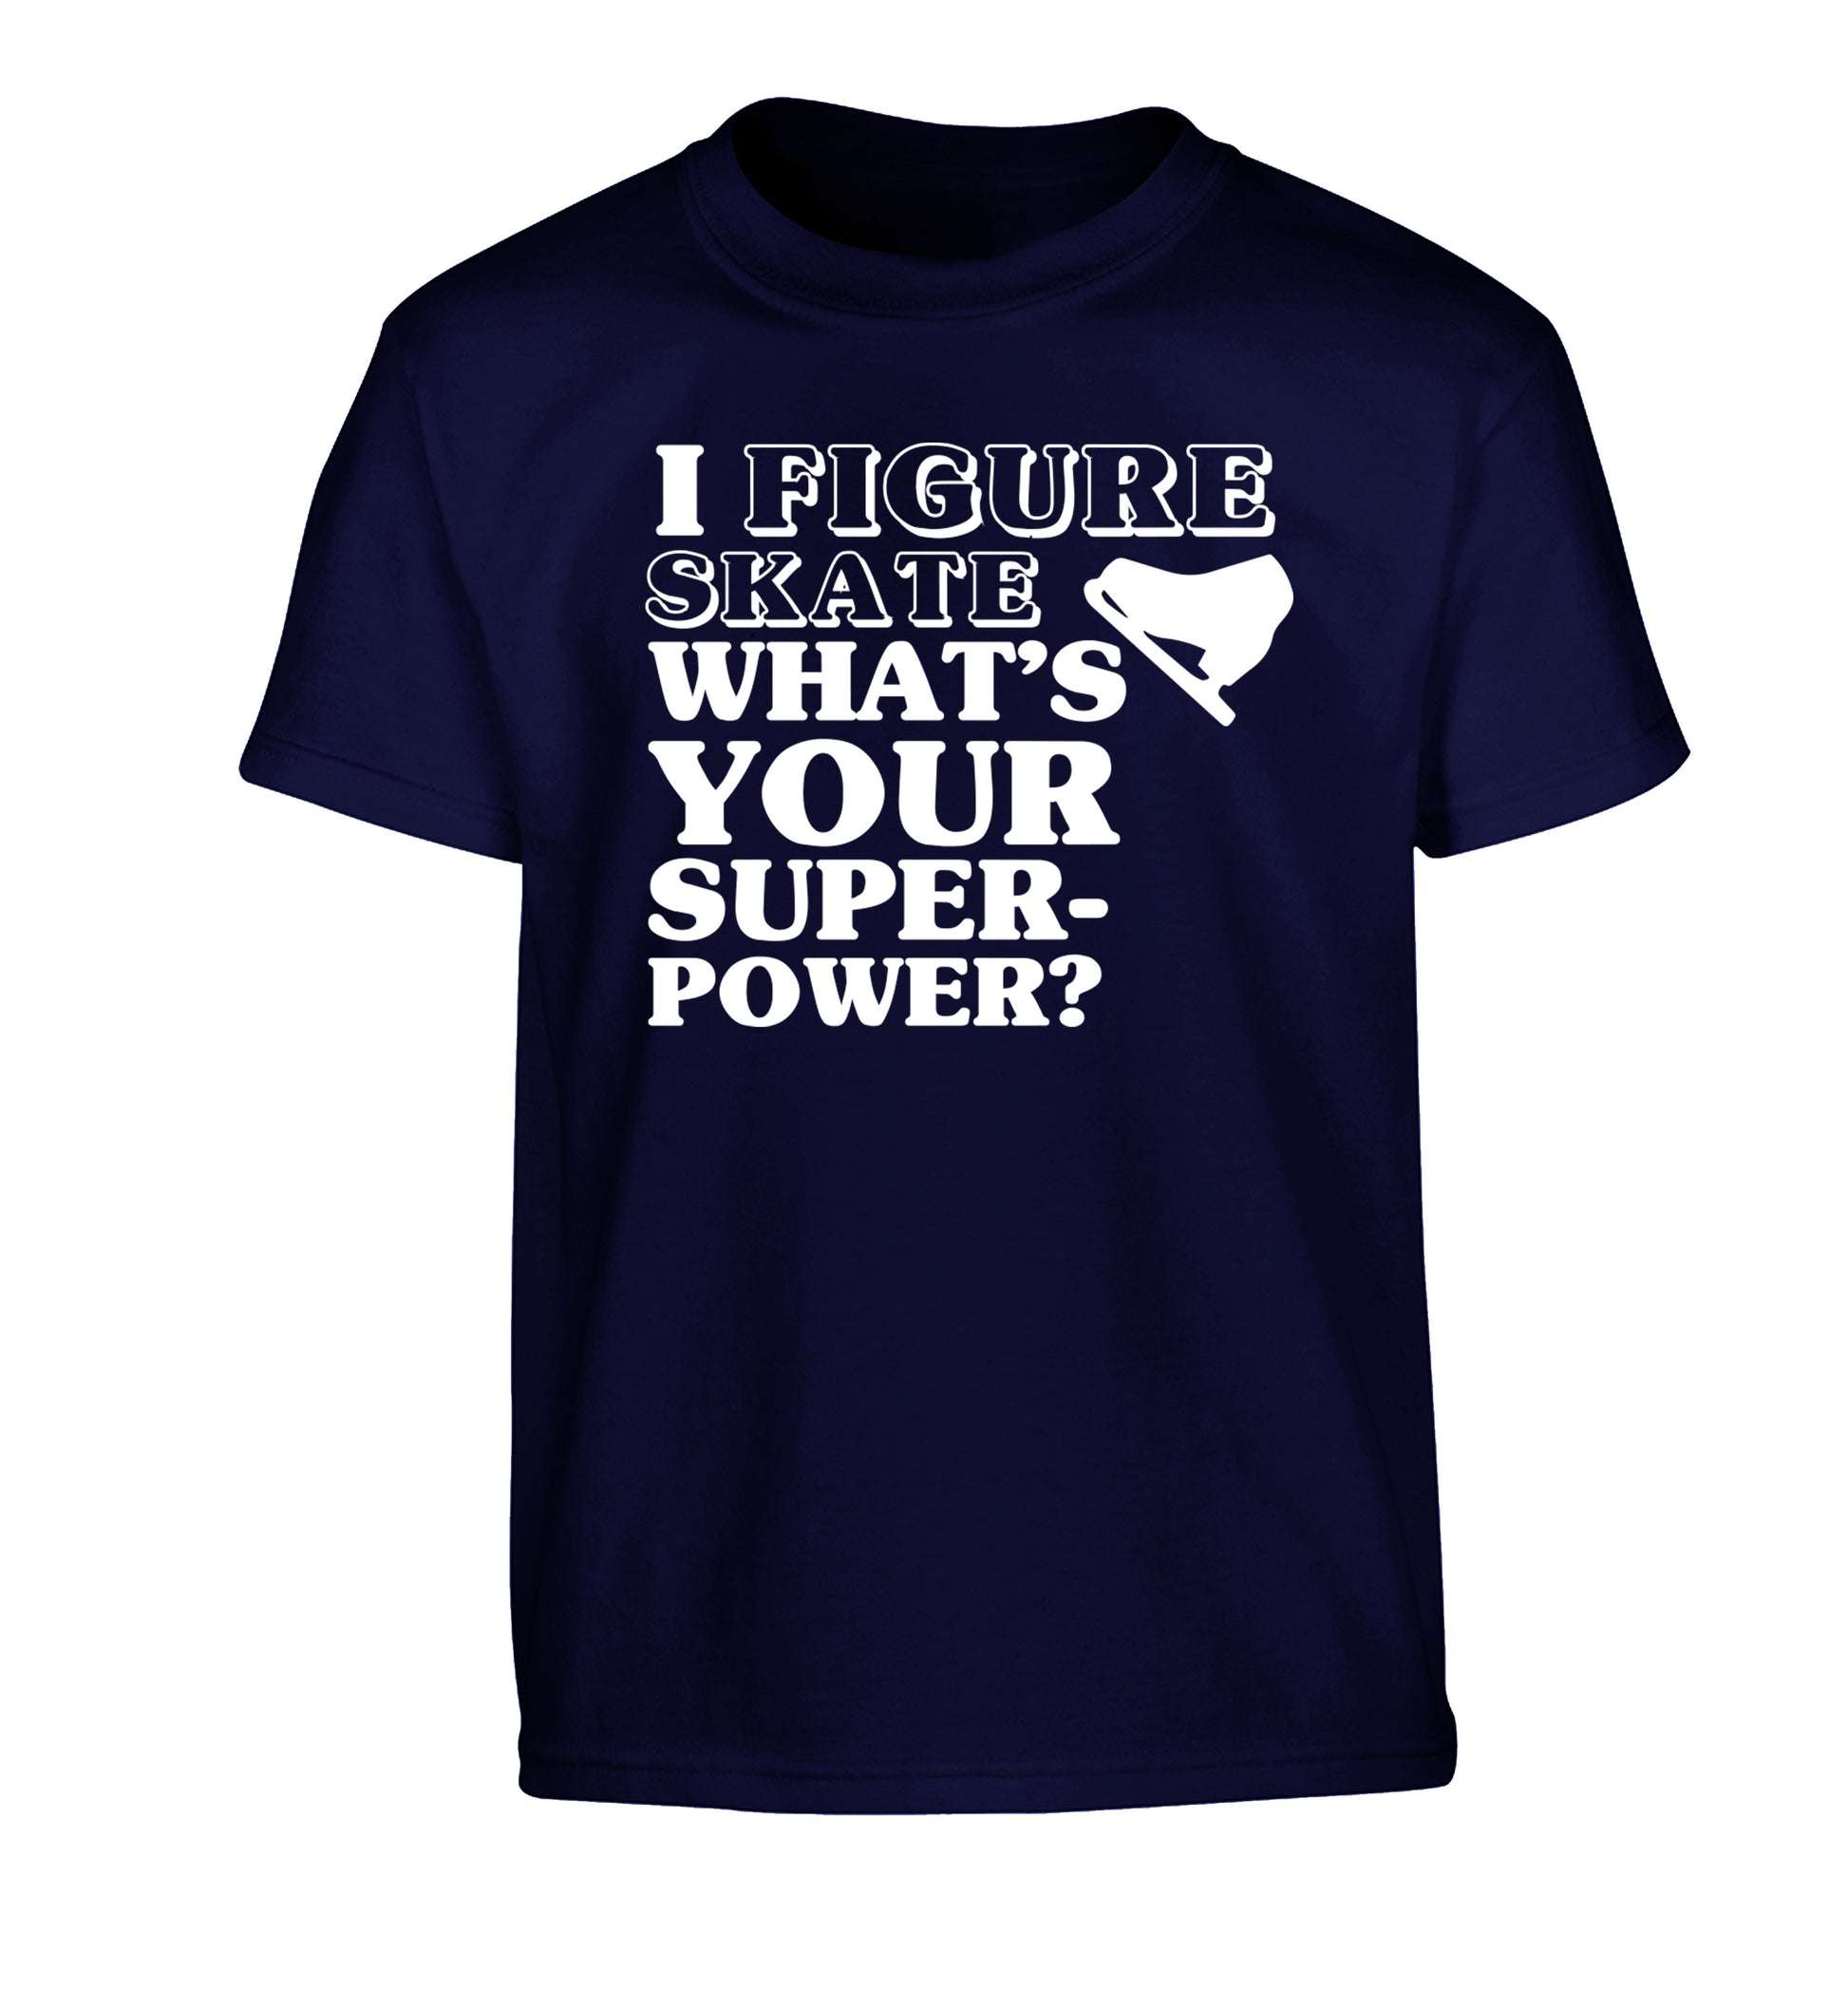 I figure skate what's your superpower? Children's navy Tshirt 12-14 Years